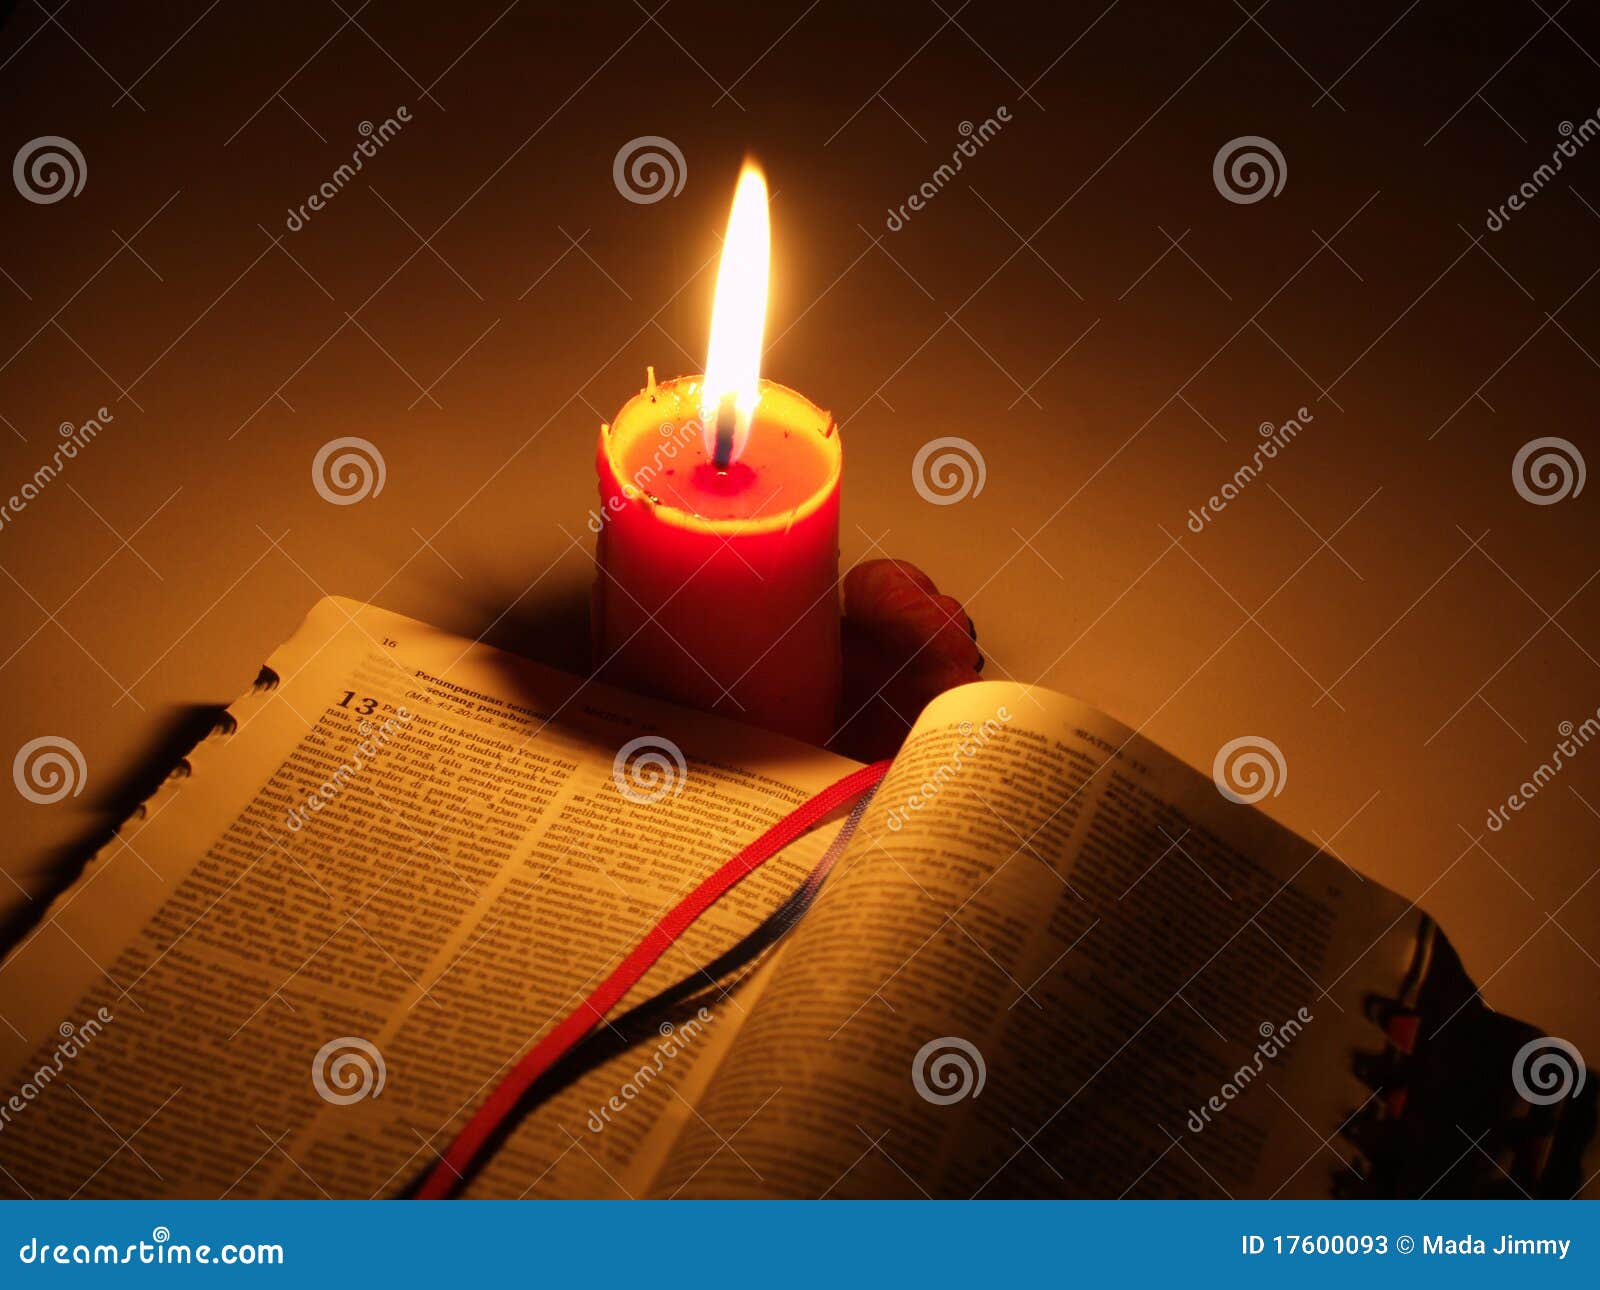 holy bible and candle